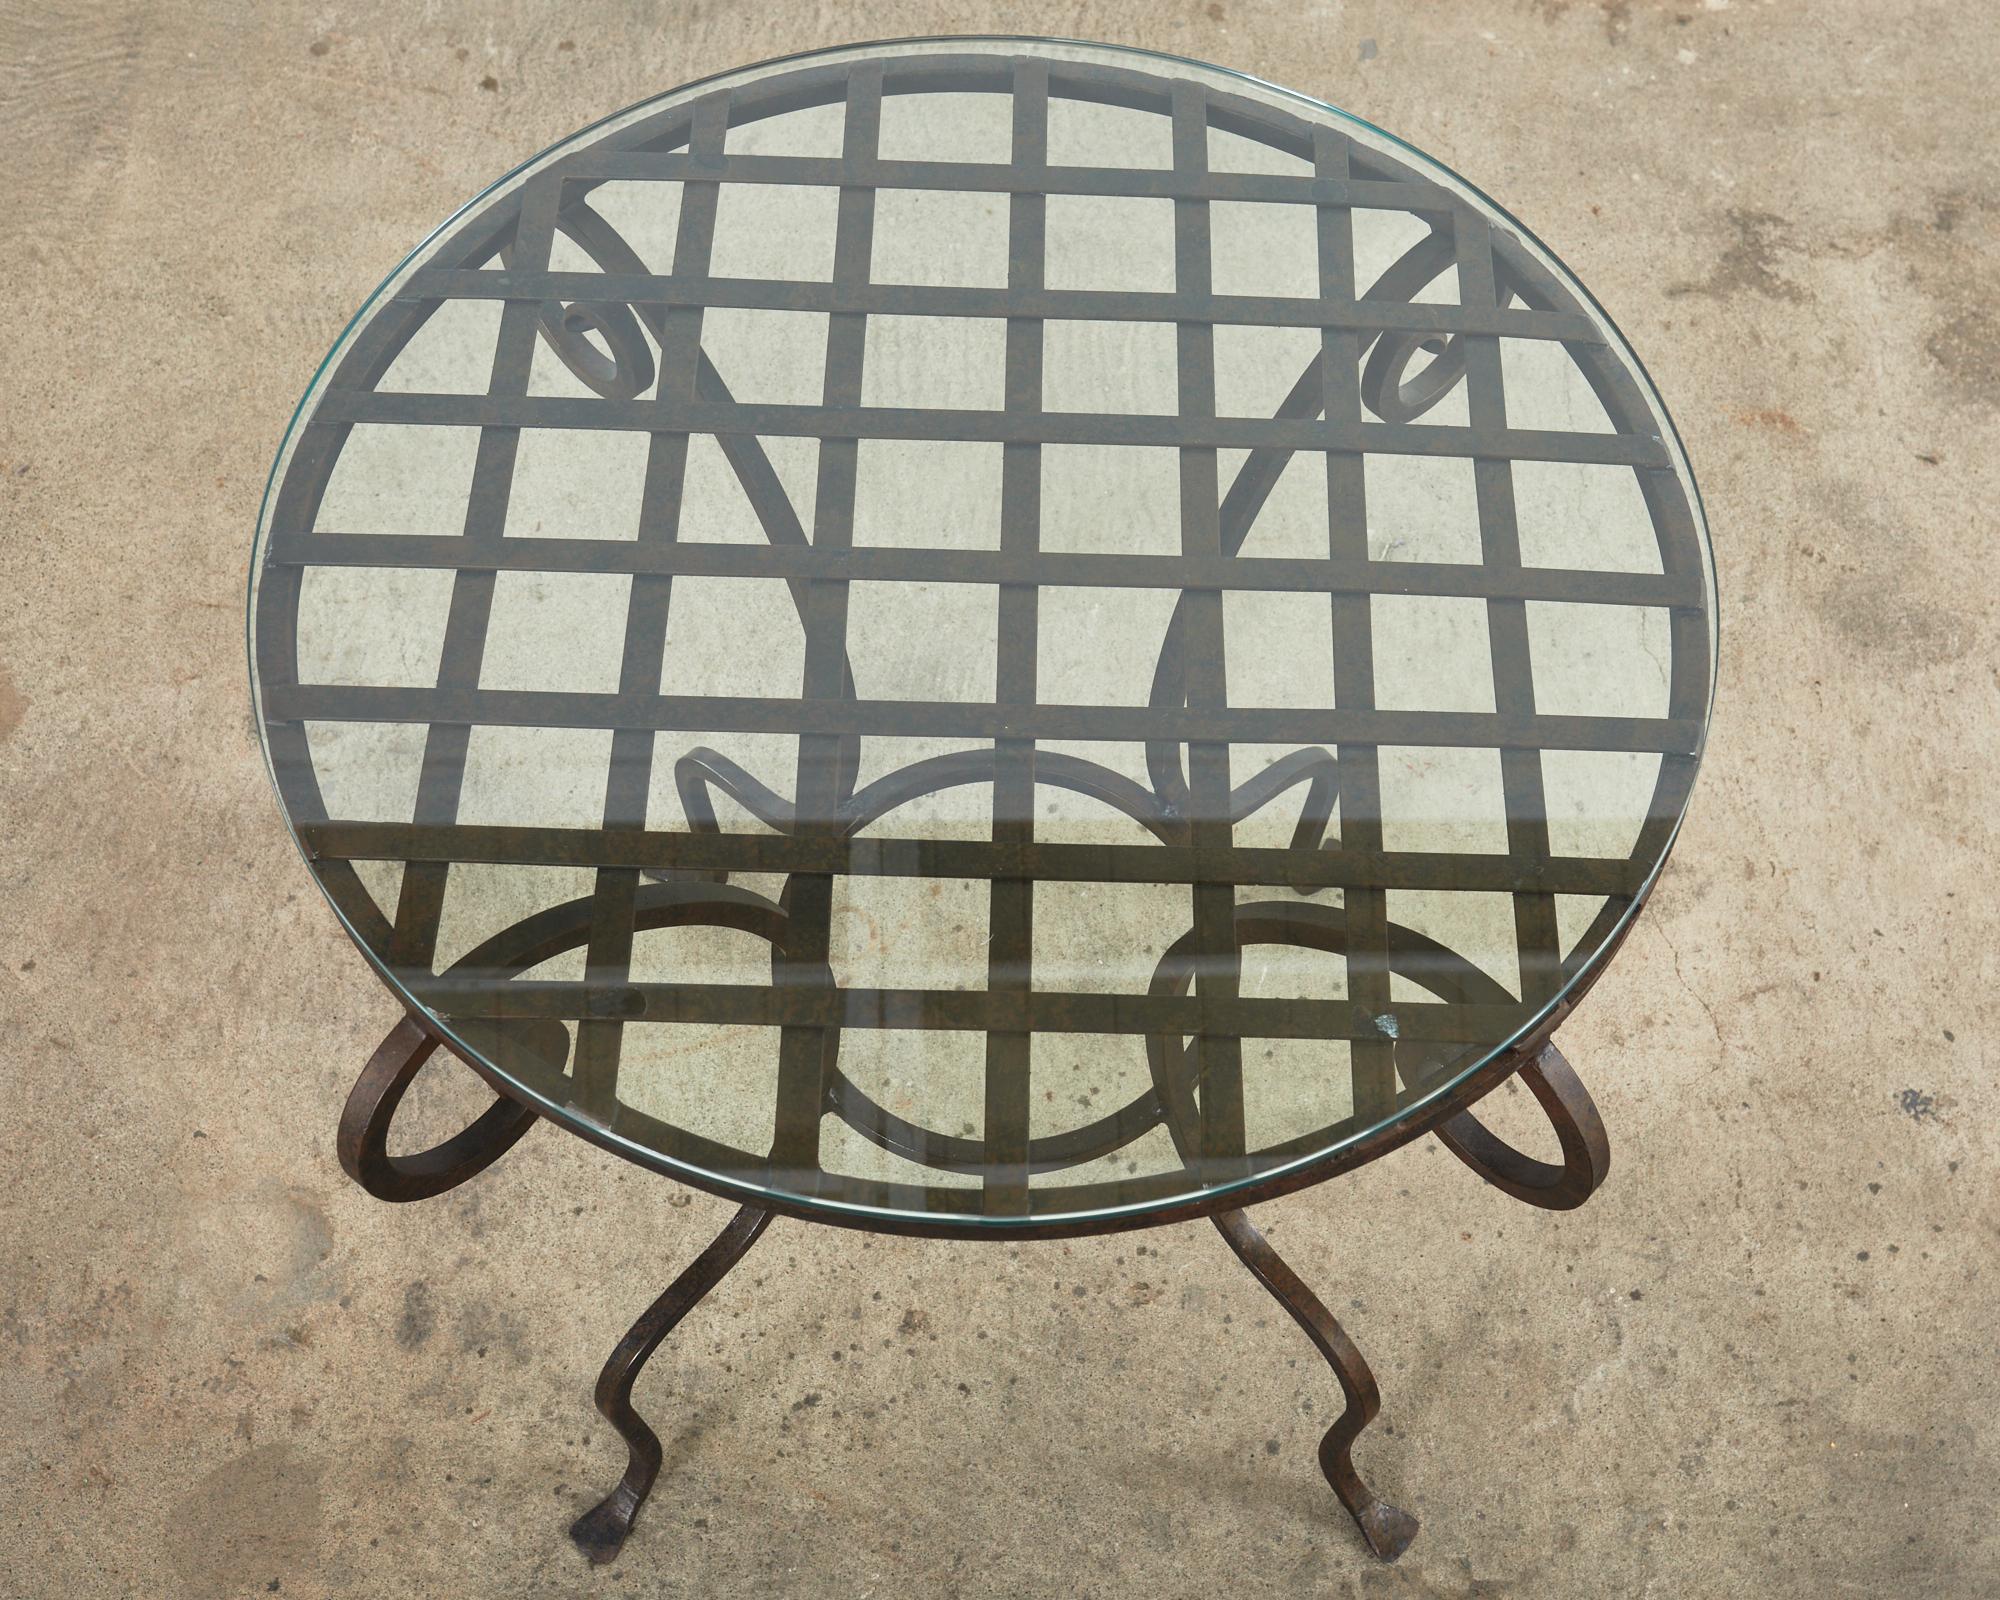 American Rose Tarlow Style Wrought Iron Patio Garden Dining Table For Sale